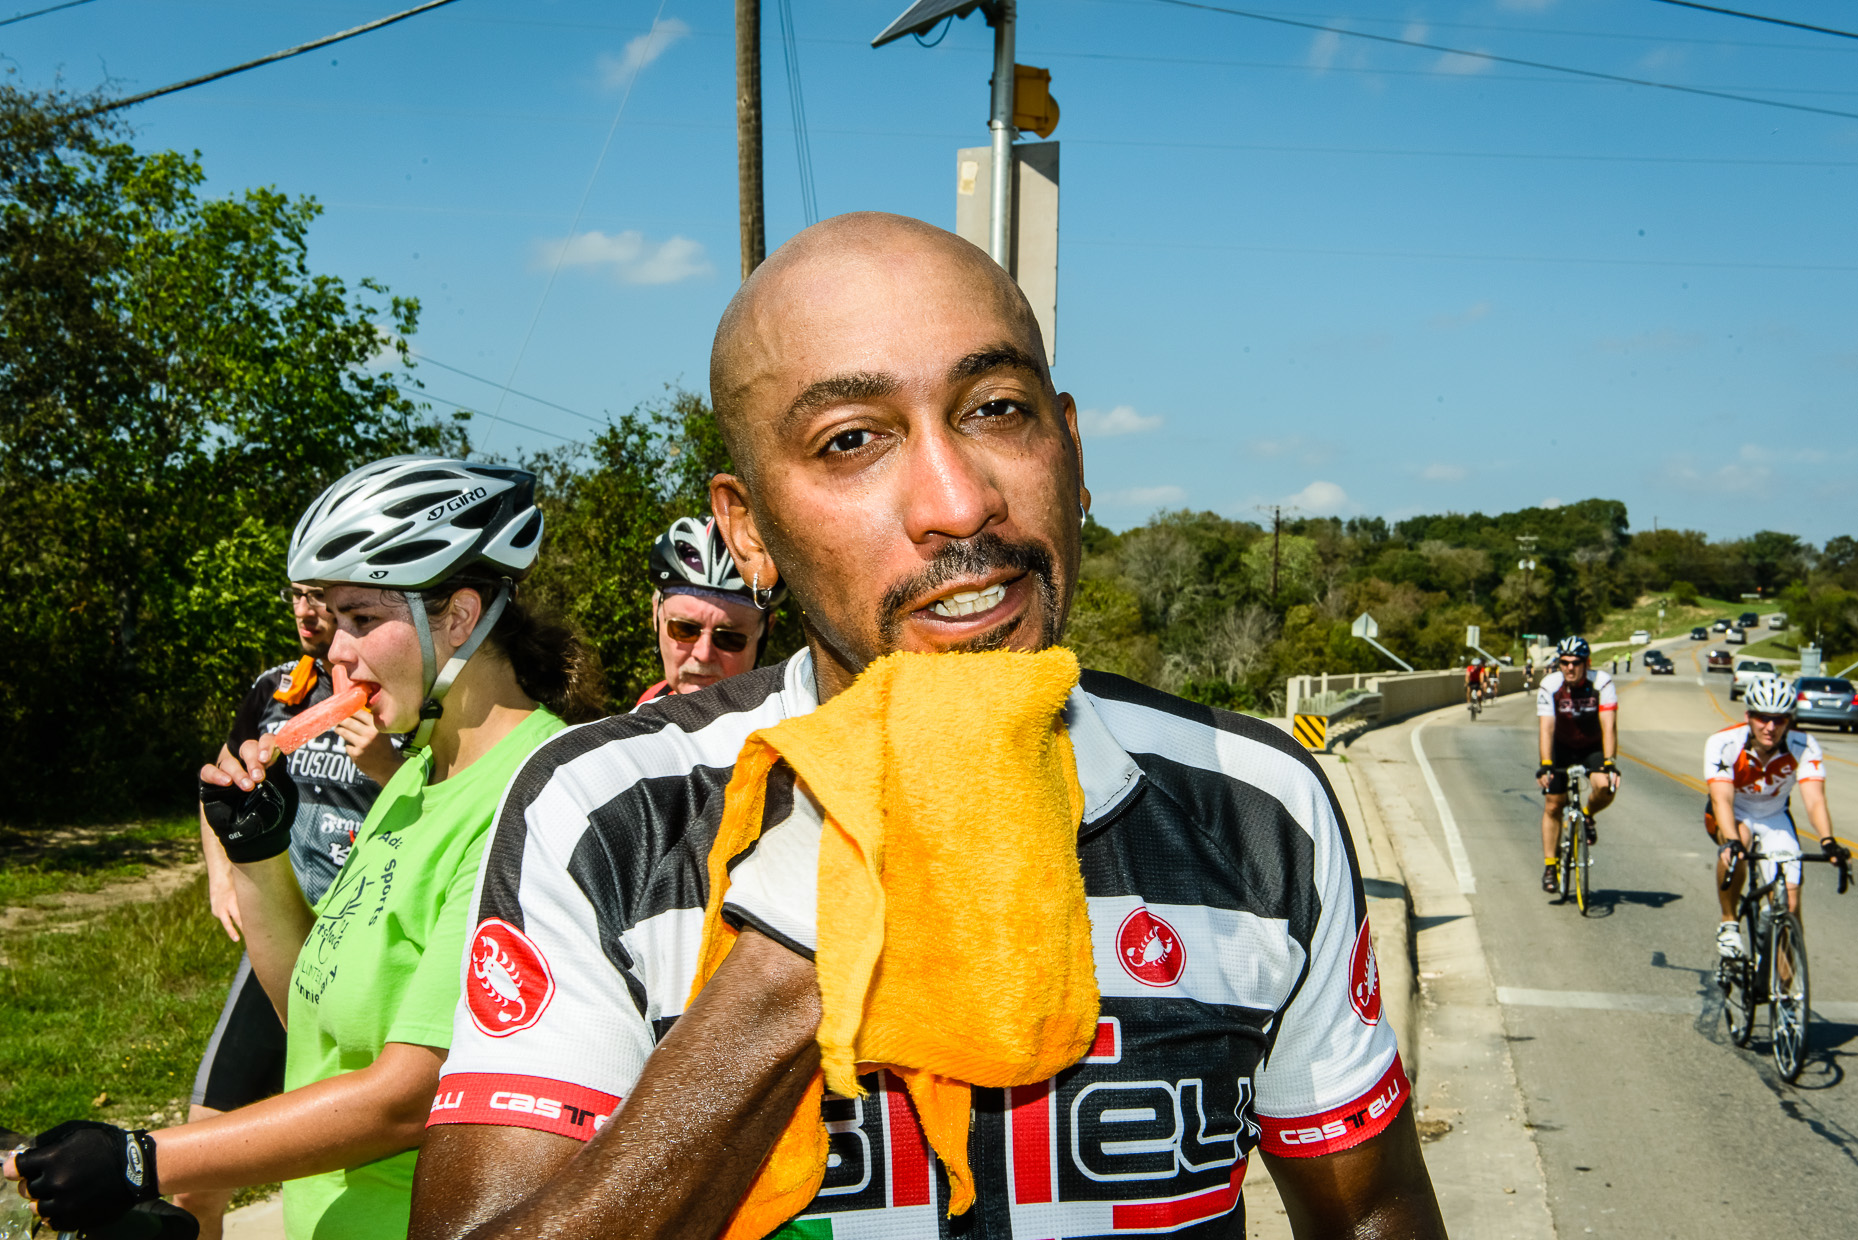 Livestrong-Challenge-bicycle-austin-photographer-ride-car2go.jpg